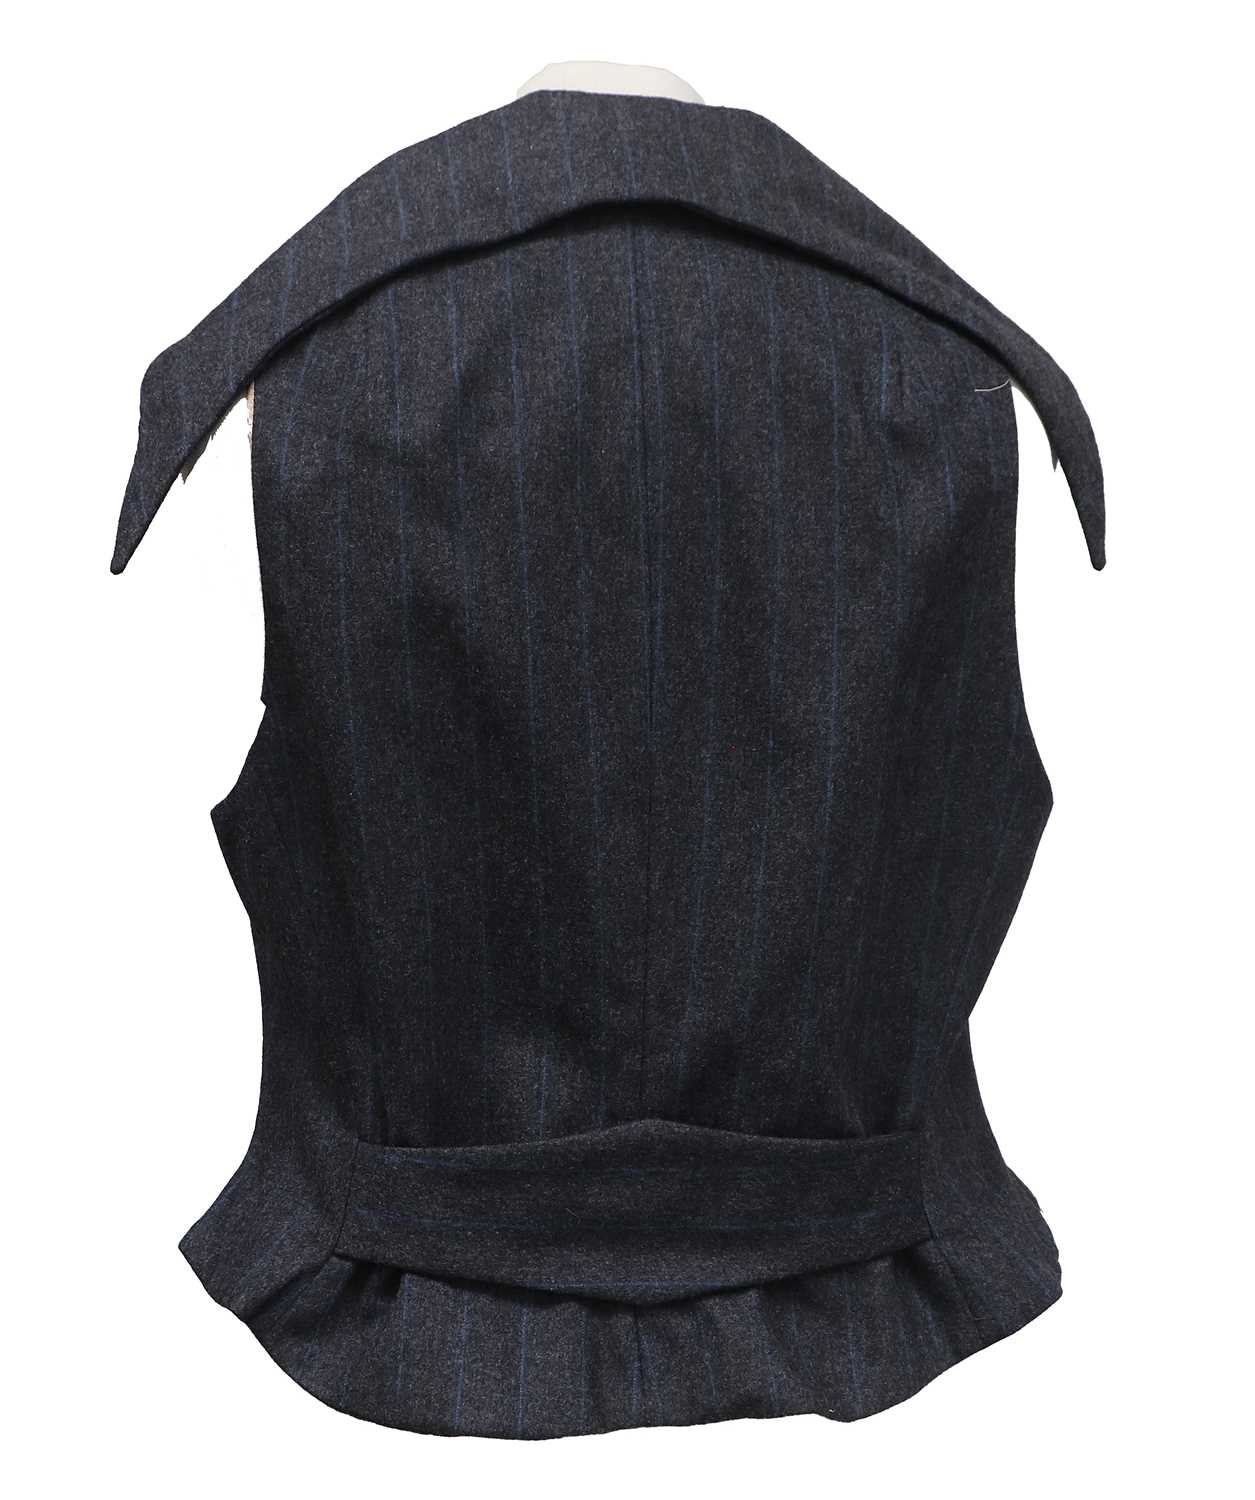 Vivienne Westwood Ingles Waistcoat, Spring/Summer Café Society Collection 1994, in grey and blue - Image 2 of 14